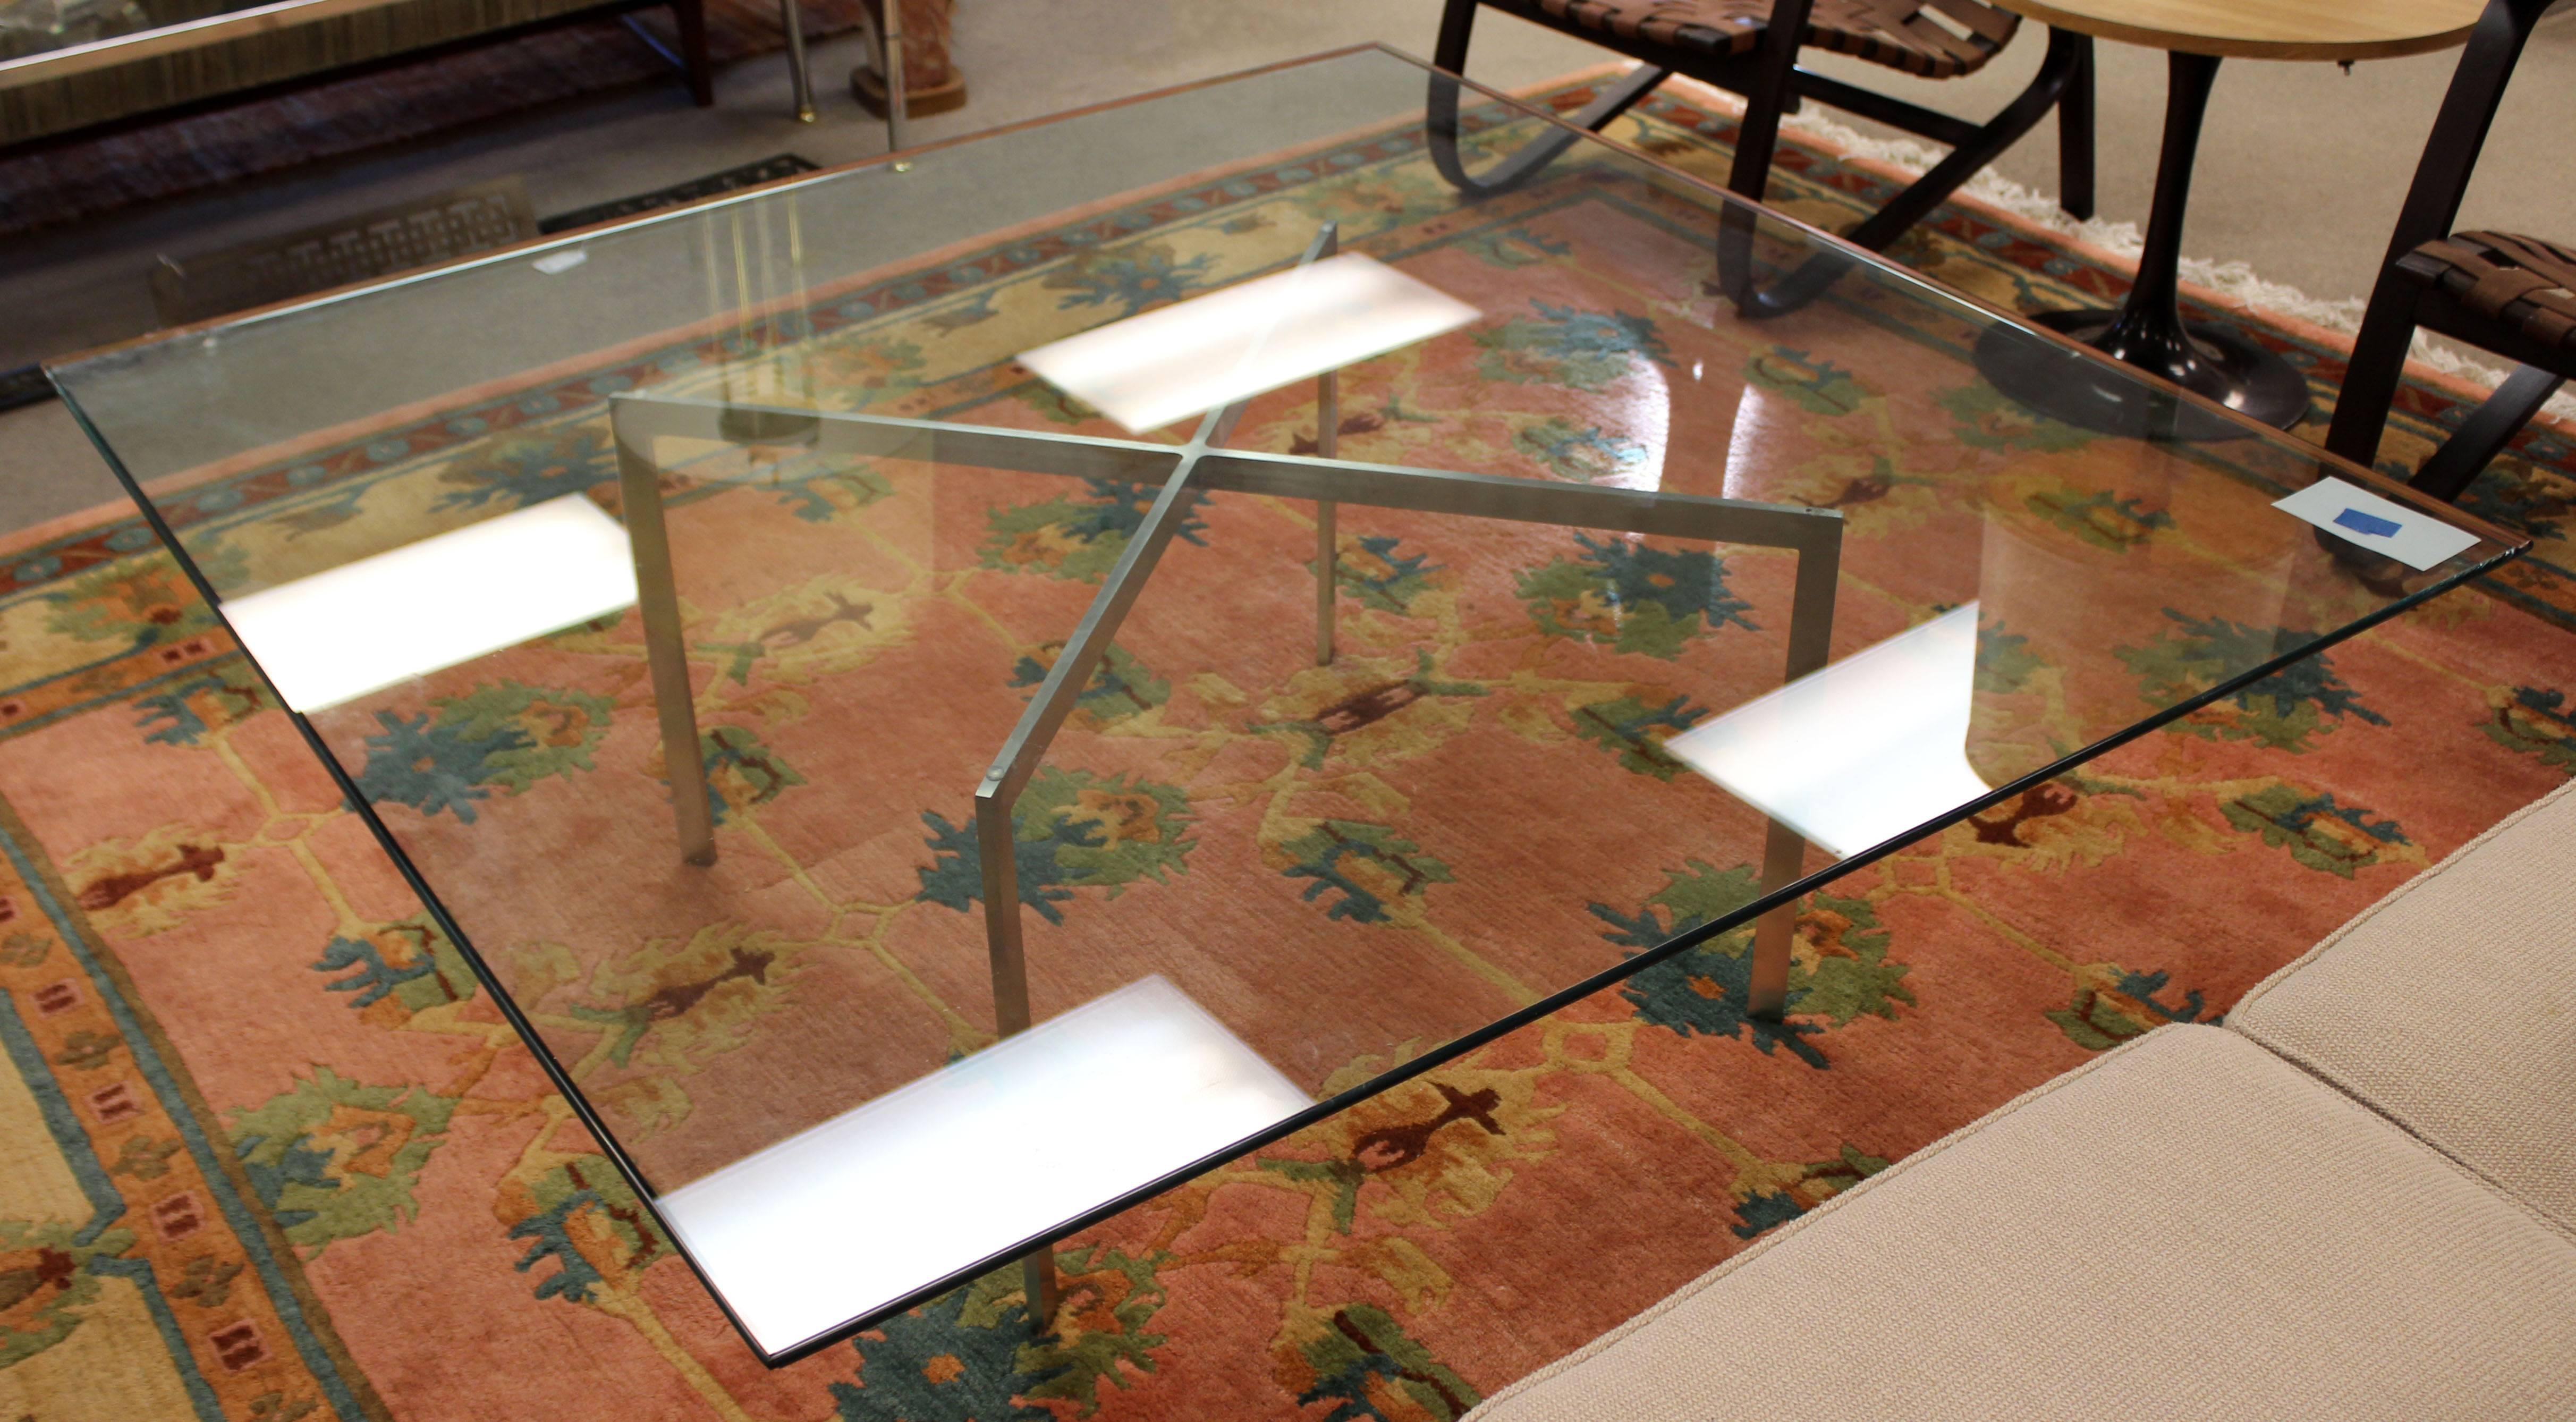 For your consideration is a gorgeous, brushed, stainless steel, coffee table, with a square, bevelled glass top called the Barcelona, table by Mies van der Rohe. In excellent condition. The dimensions are 54